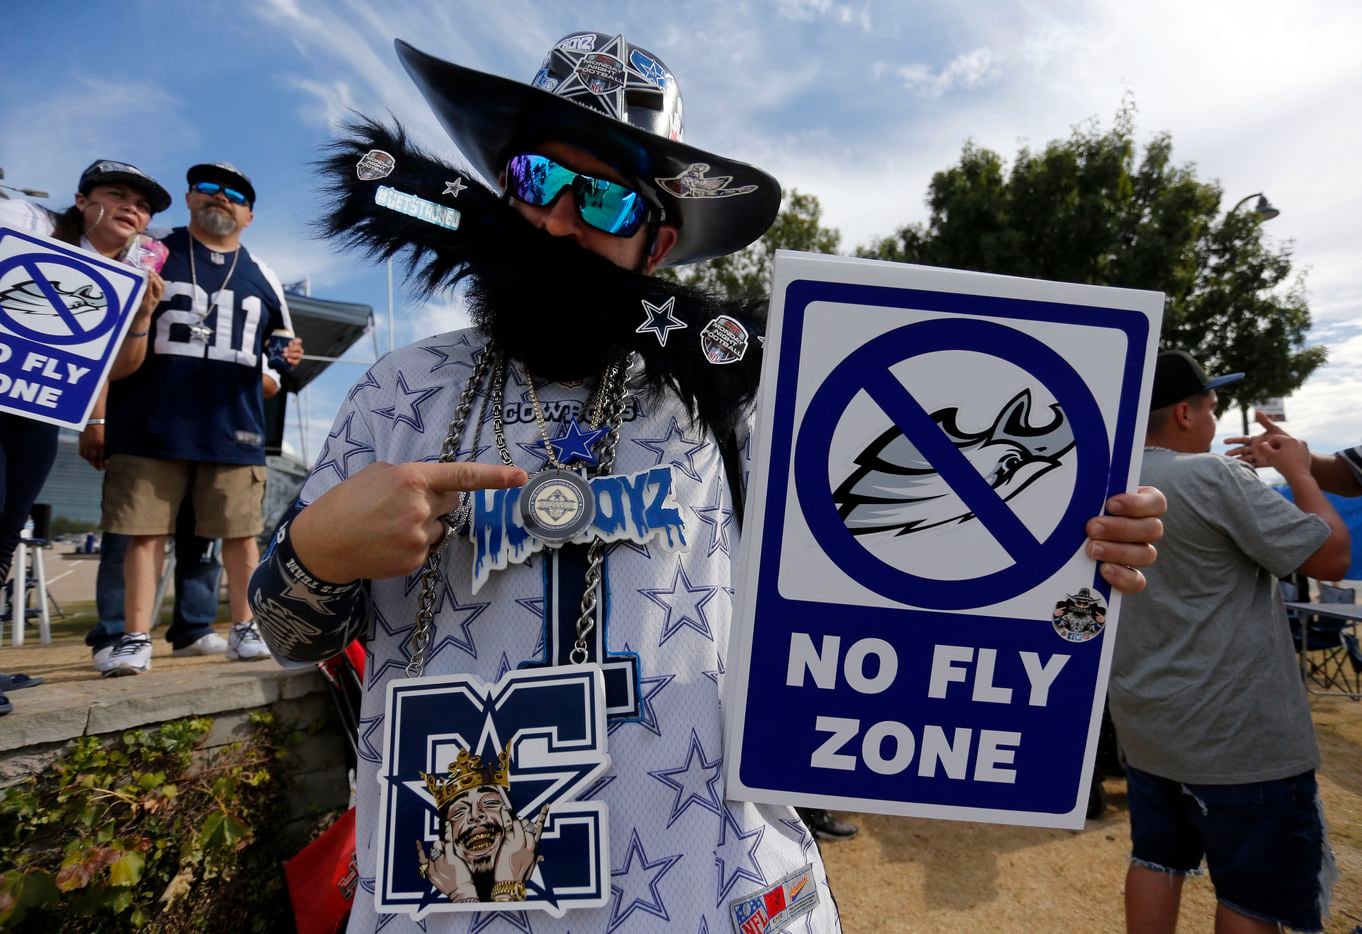 Dallas Cowboys fane Kevin “Stacheman” Baldwin, of Friso, displays his “No FlyZone” sign (meaning the Philadelphia Eagles’ passing game will be thwarted tonight), while tailgating before a NFL football game between the Dallas Cowboys and the Philadelphia Eagles High at AT&T Stadium in Arlington on Monday, September 27, 2021. (John F. Rhodes / Special Contributor)